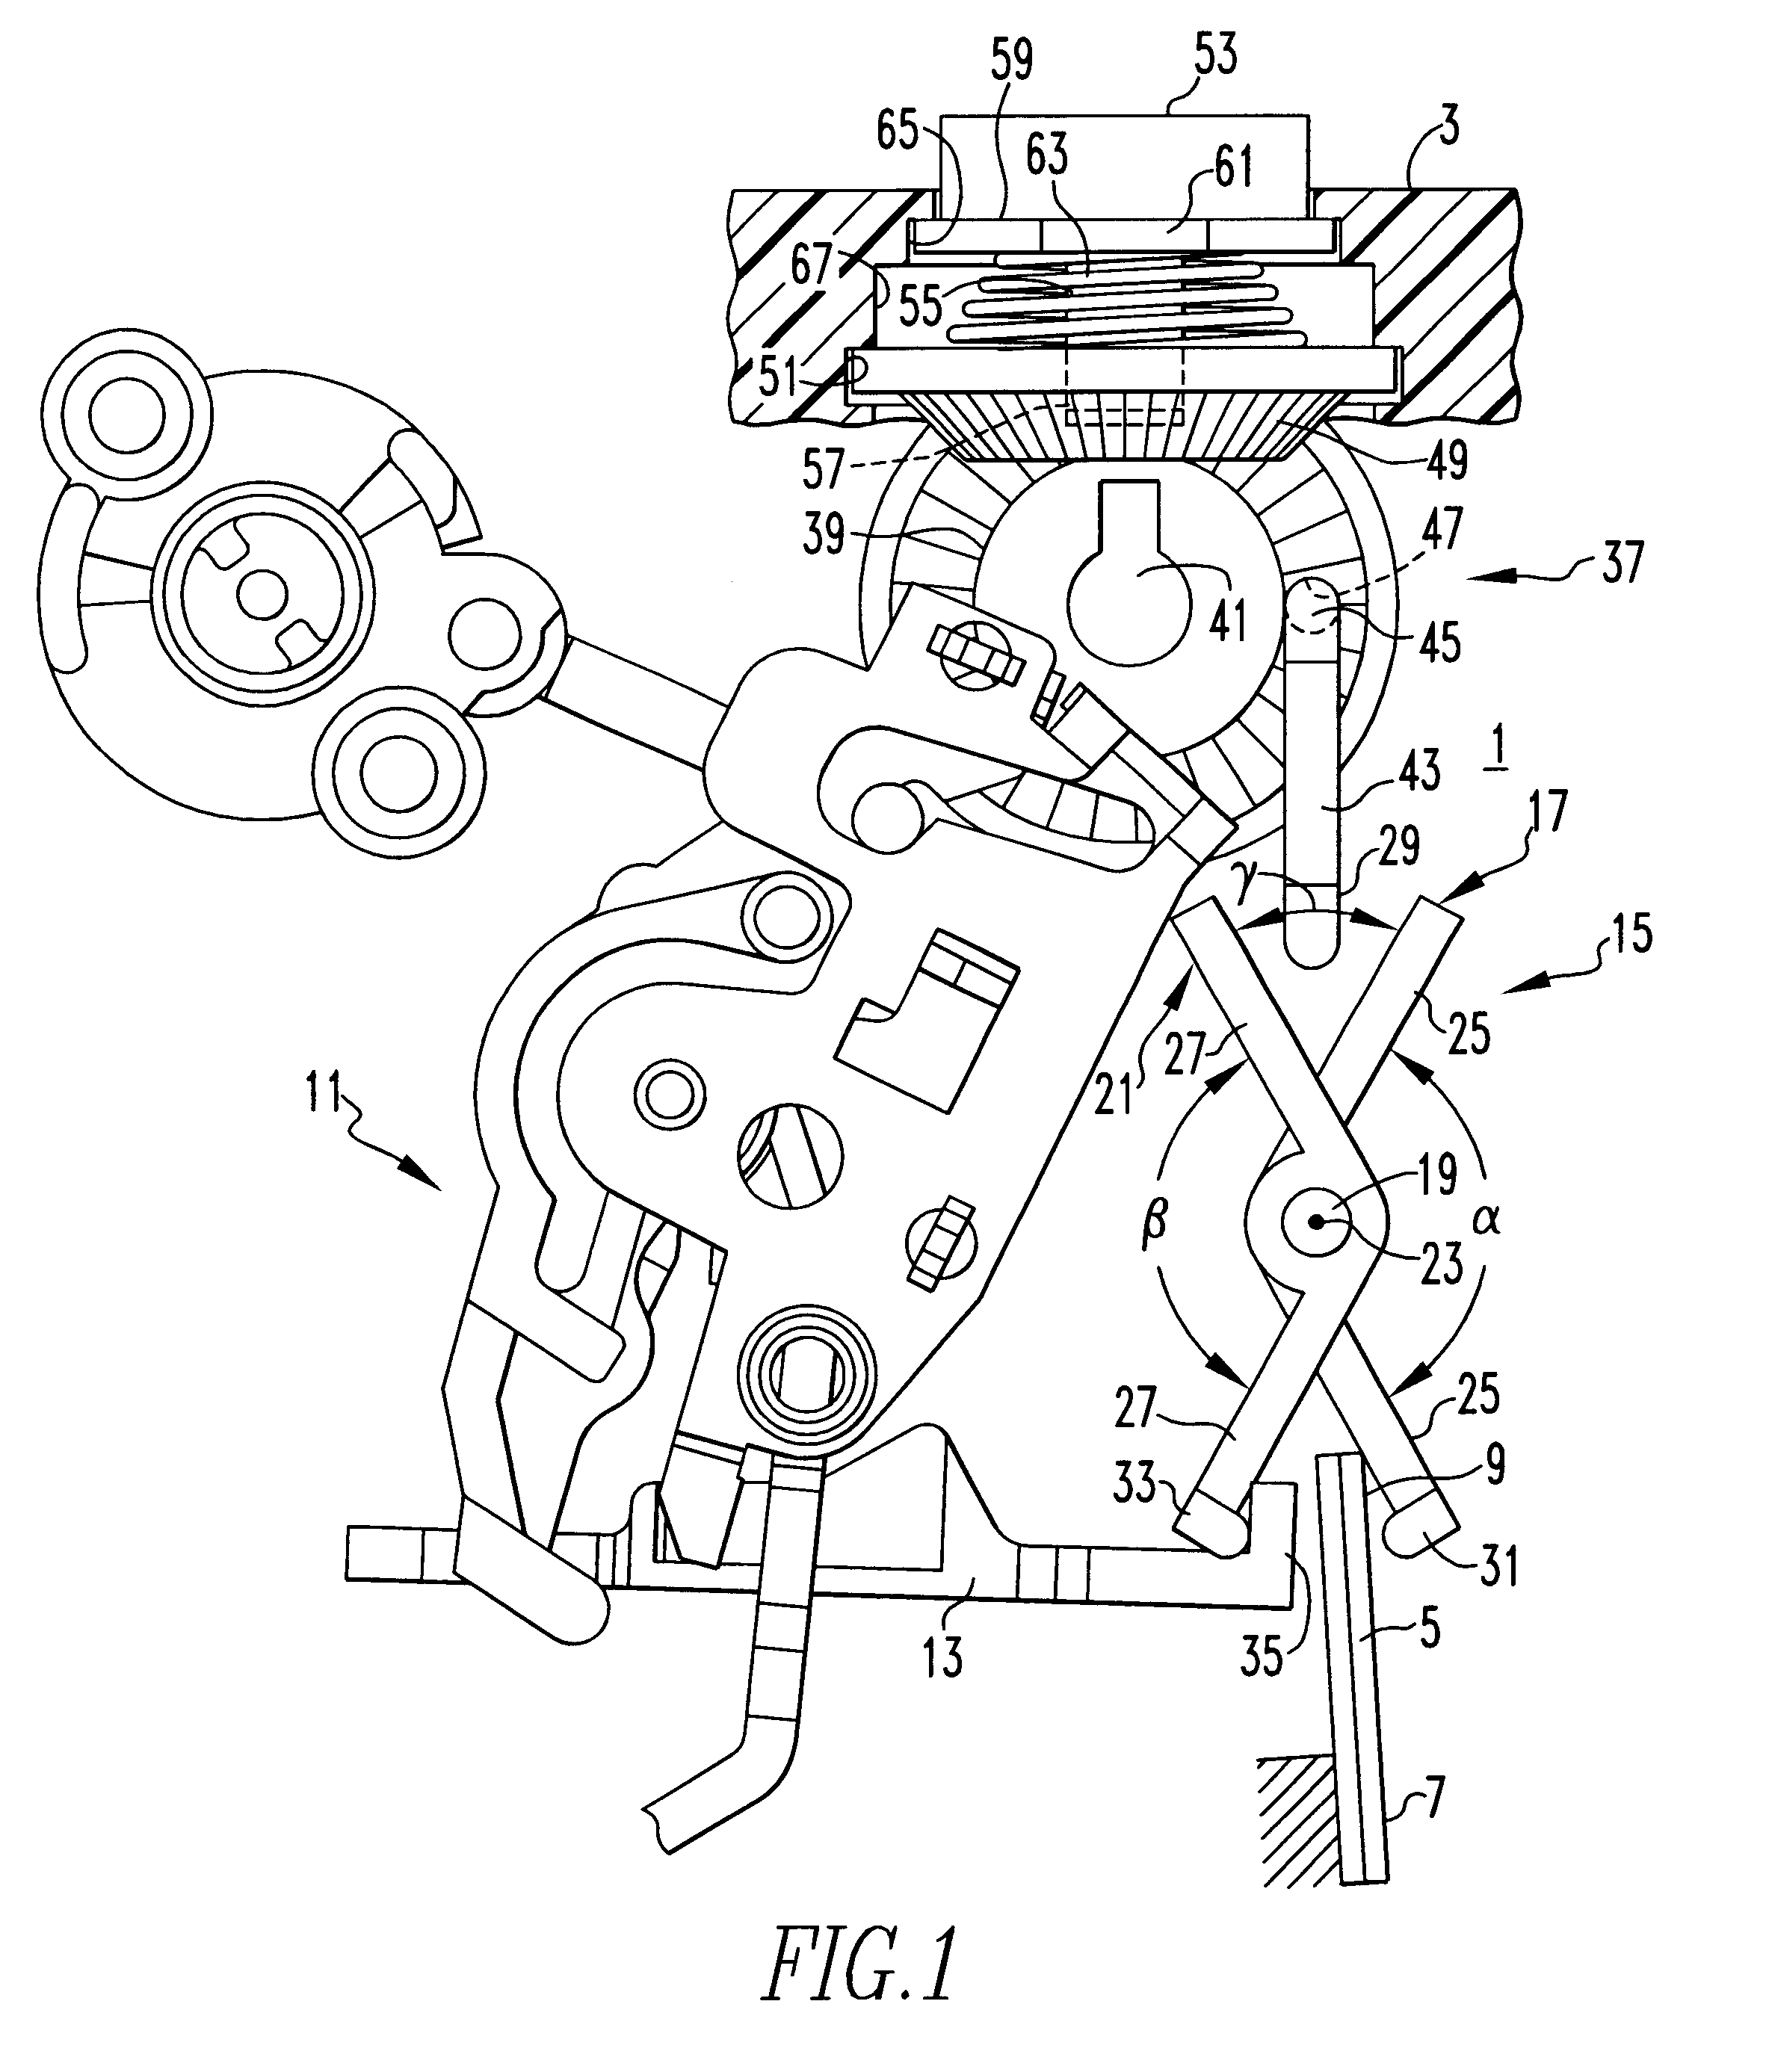 Adjustable thermal trip assembly for a circuit breaker